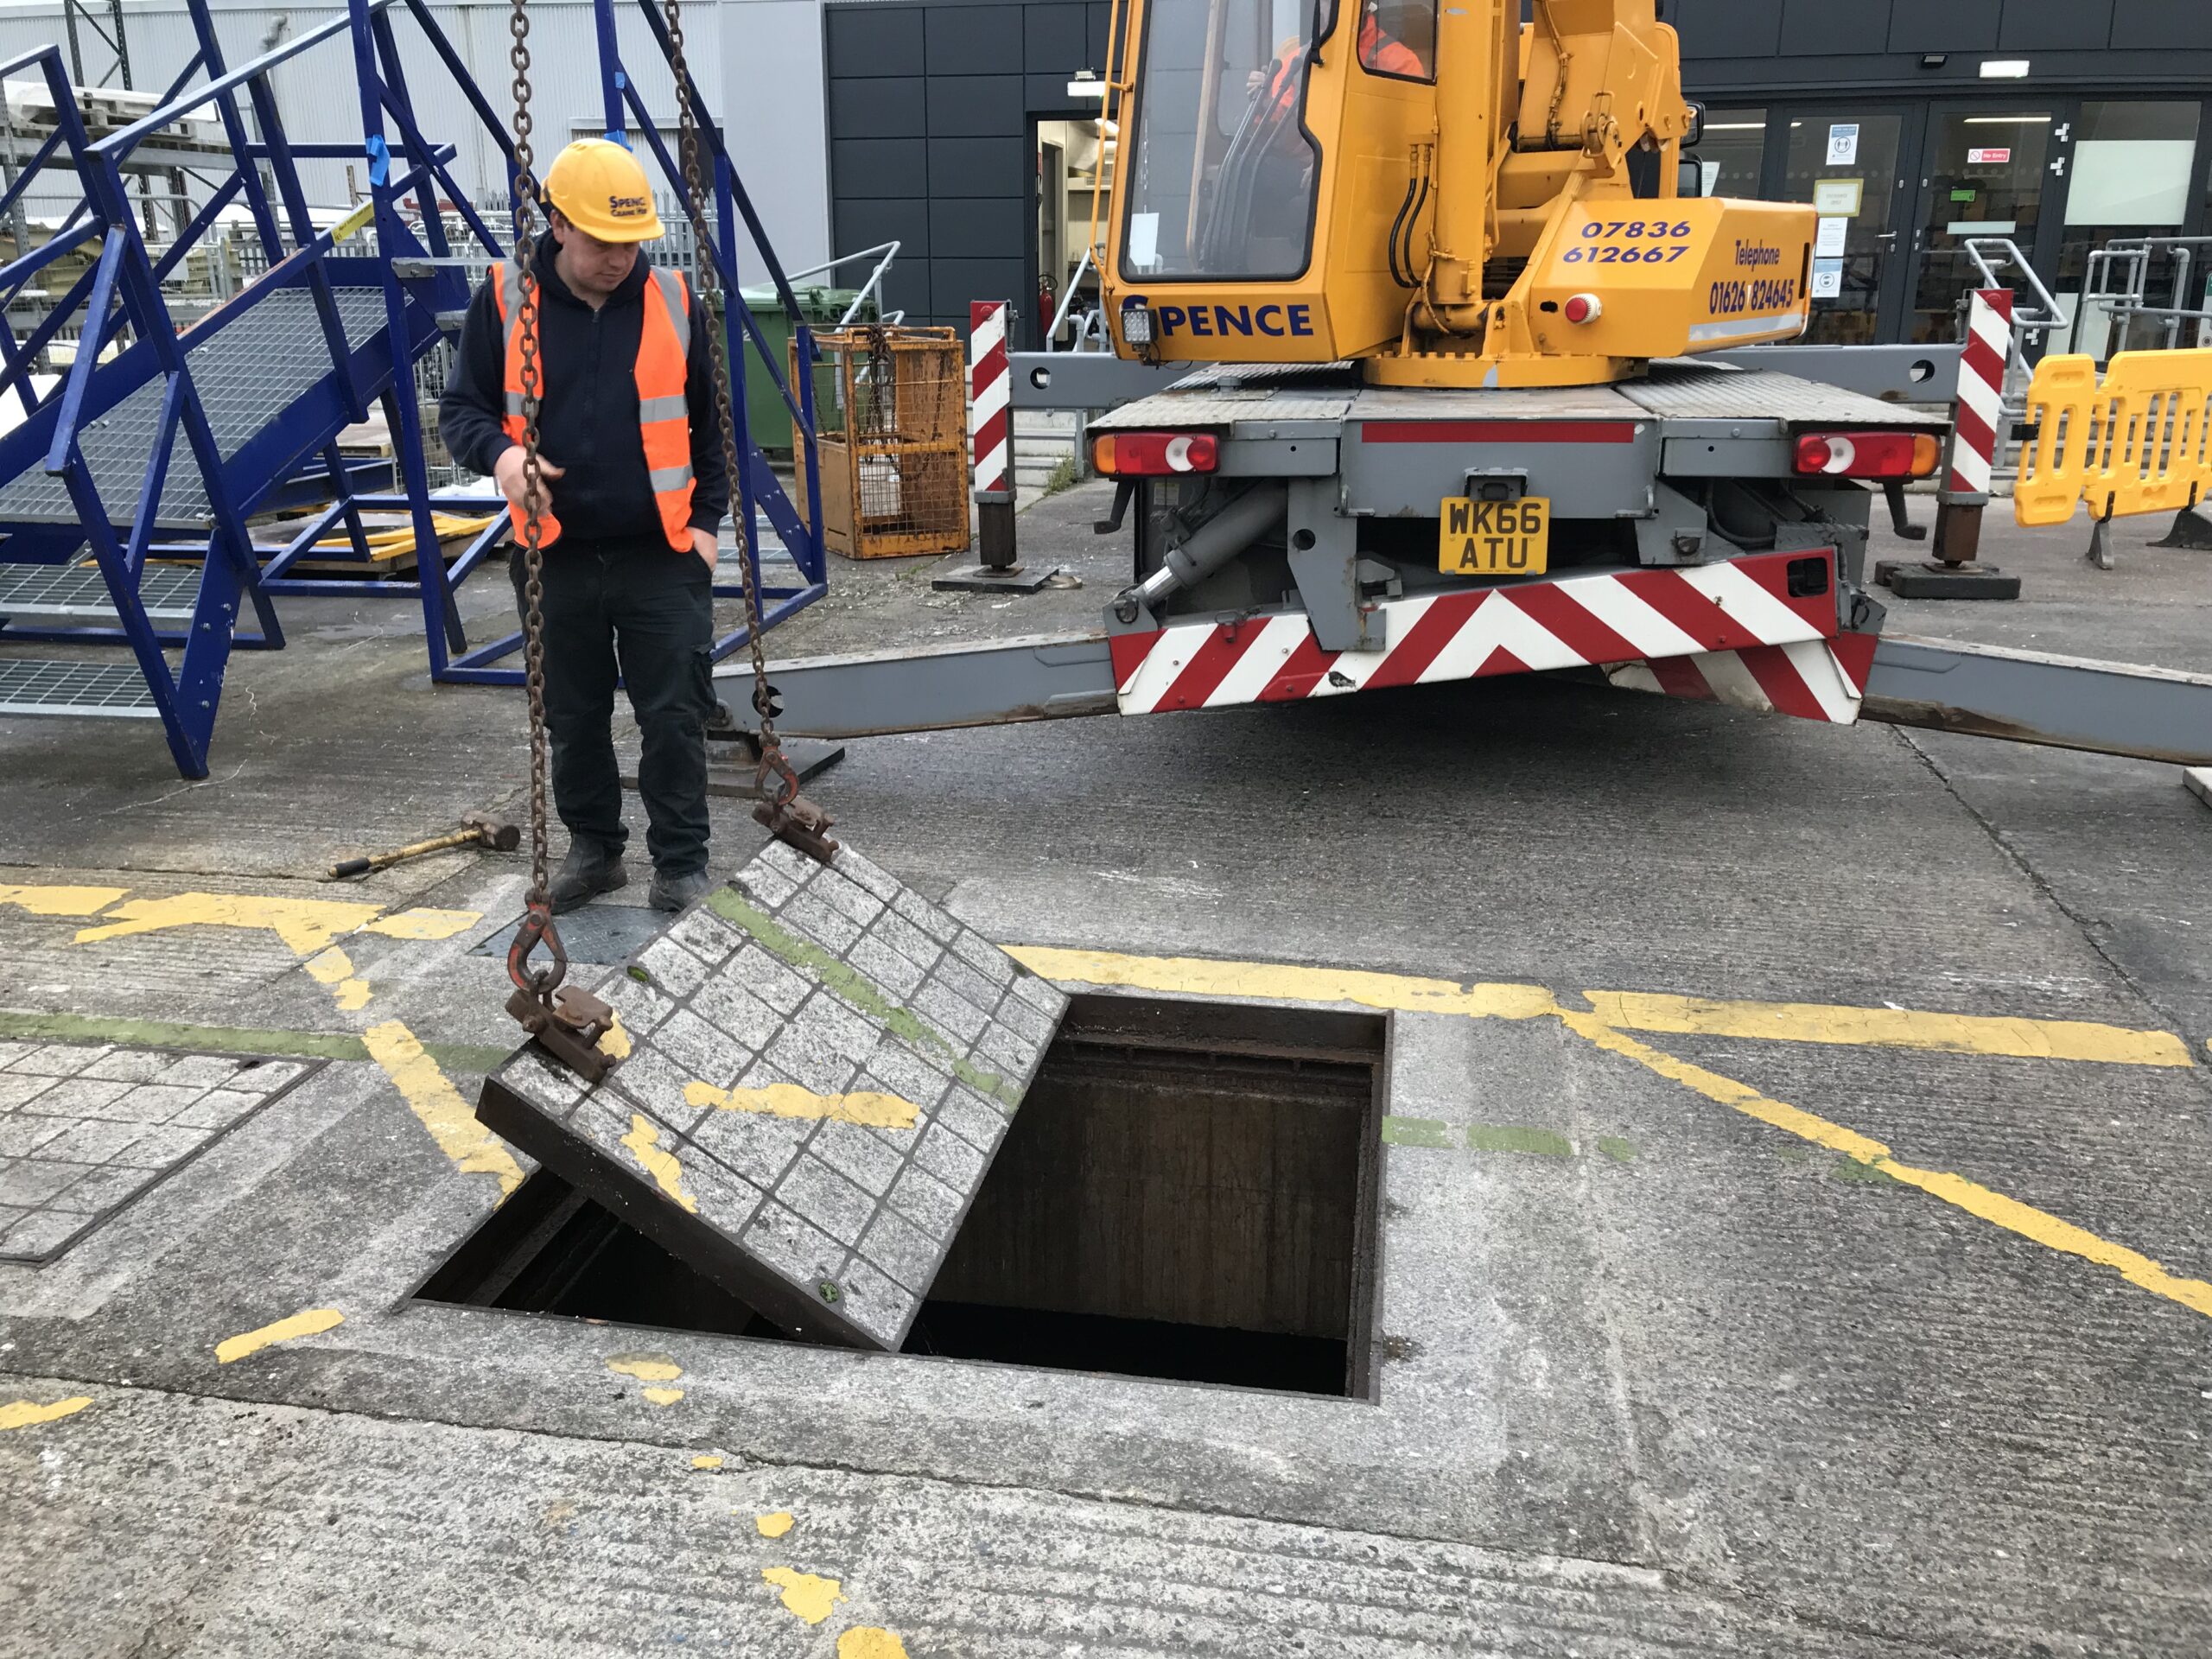 Previous installed access covers required a crane to remove and replace